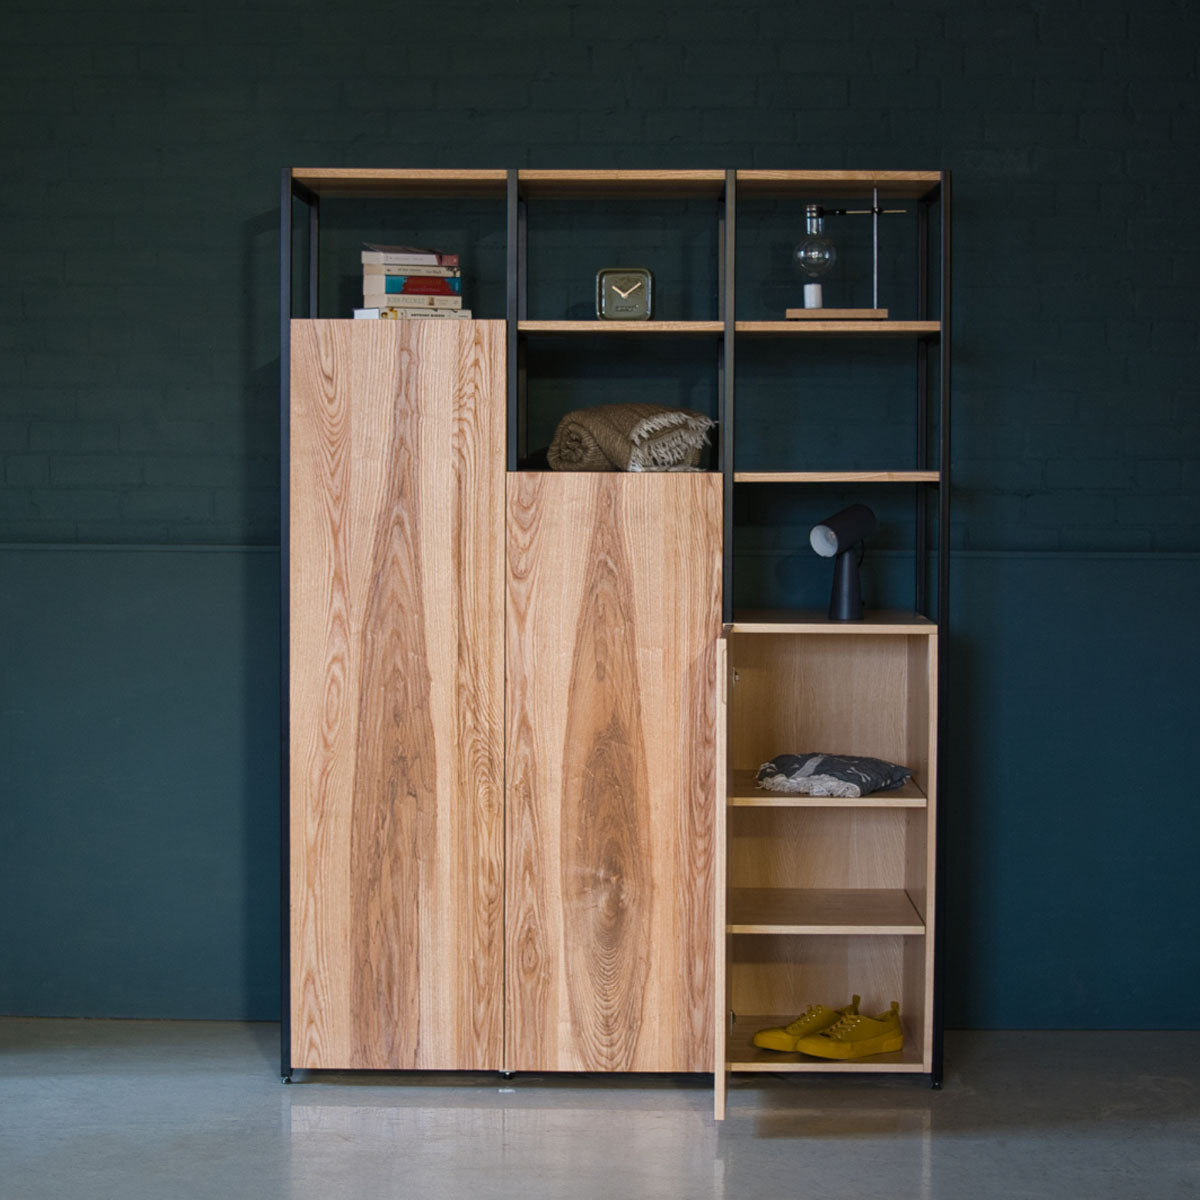 An image of the Wardrobe, Altra product available from Koda Studios